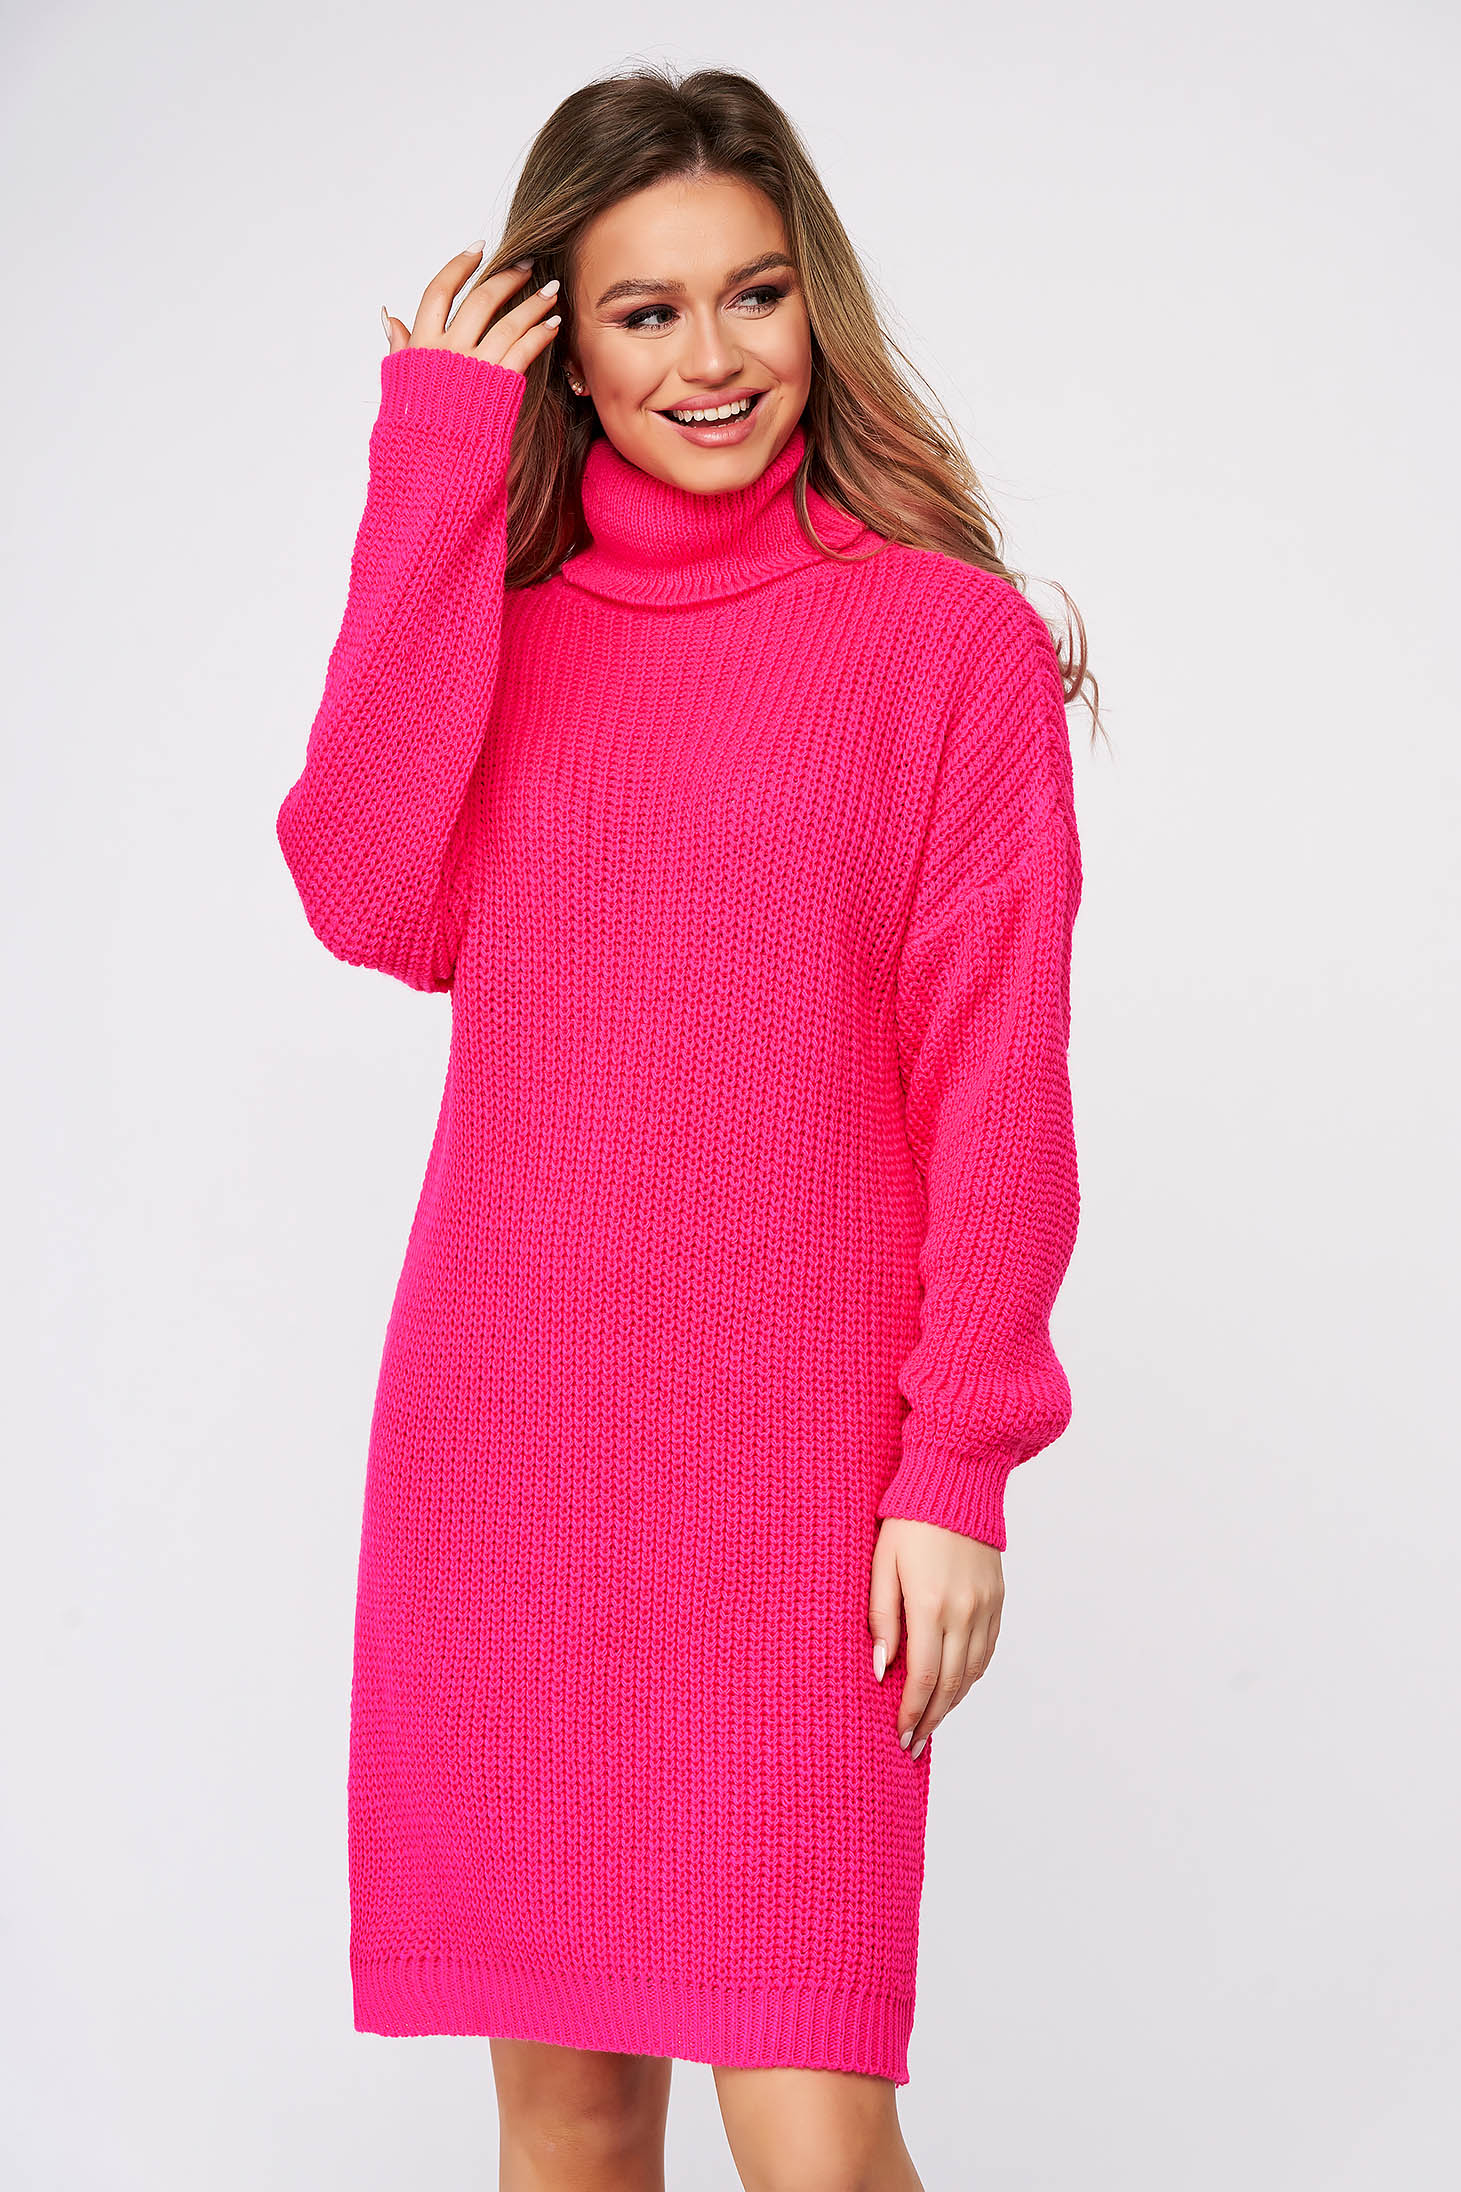 Dress pink casual knitted fabric turtleneck flared